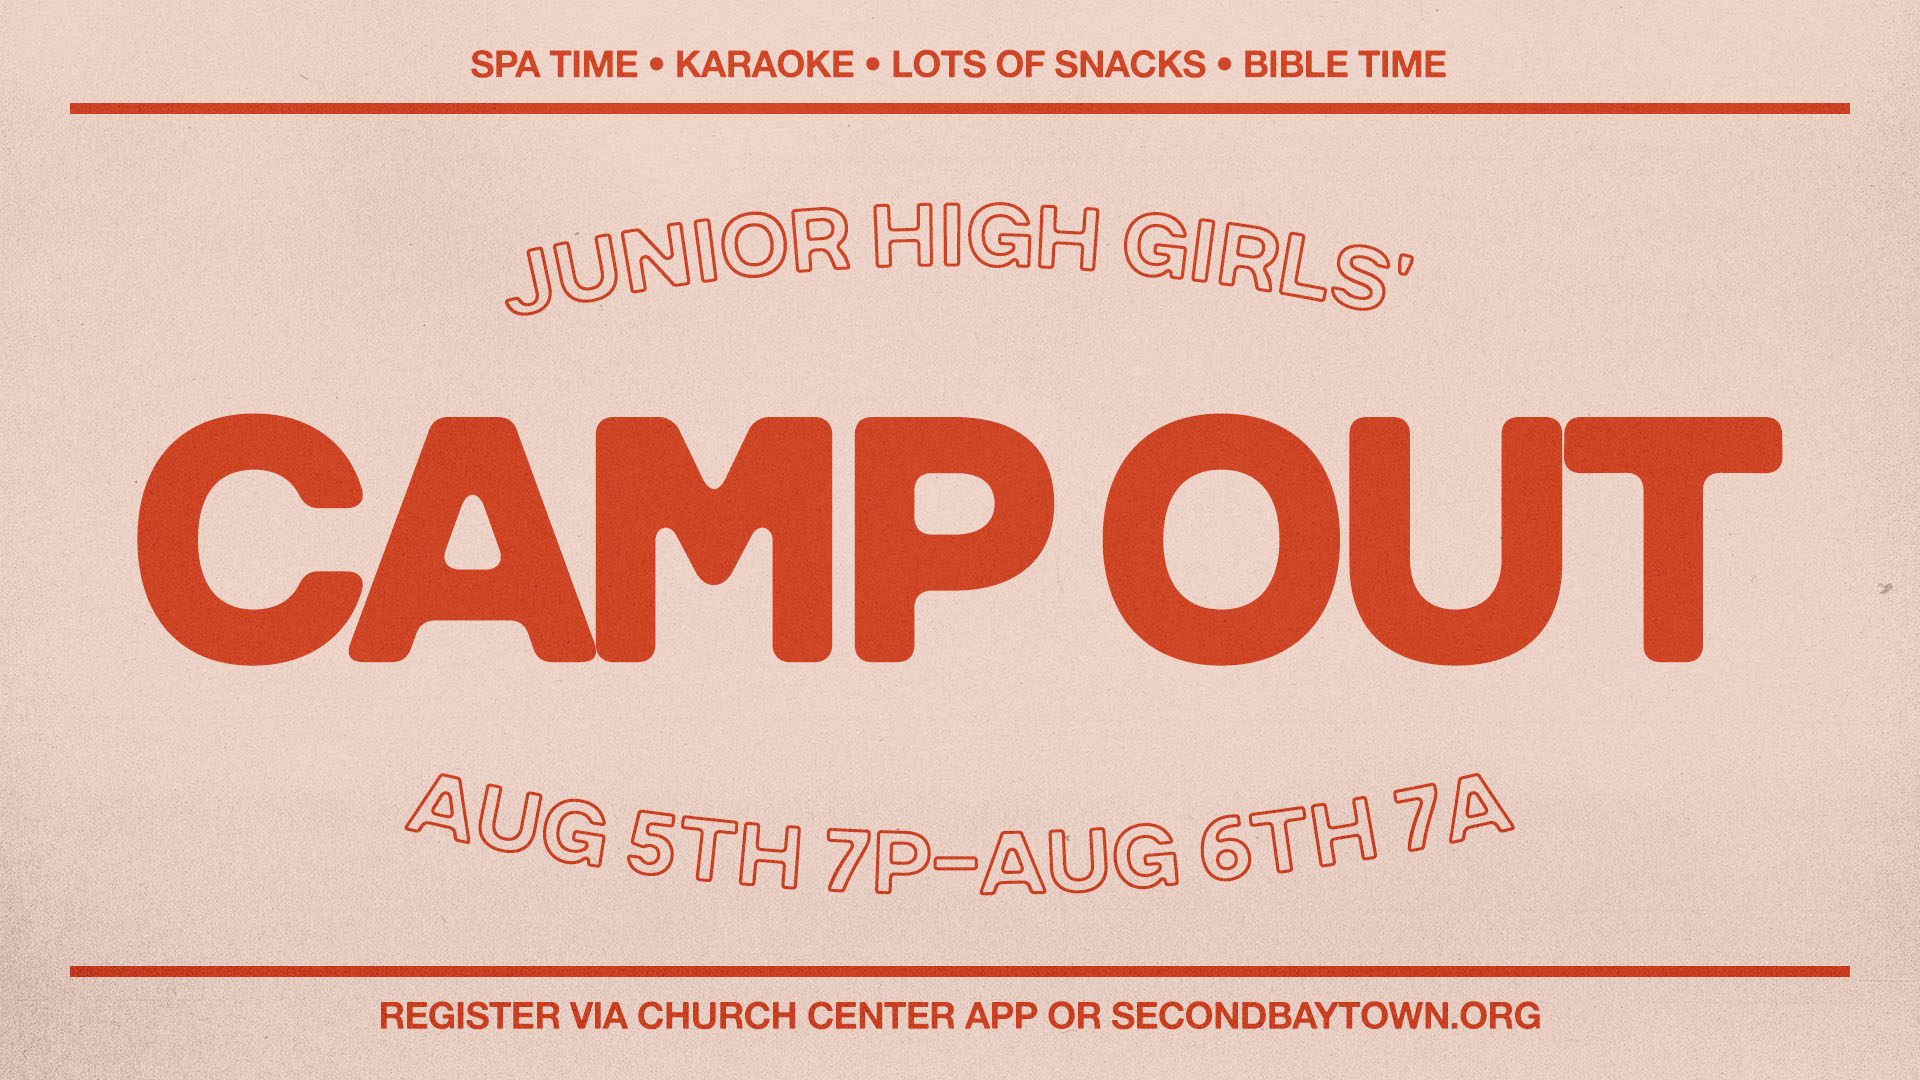 Jr. High Welcome Weekend – Girl’s Camp Out